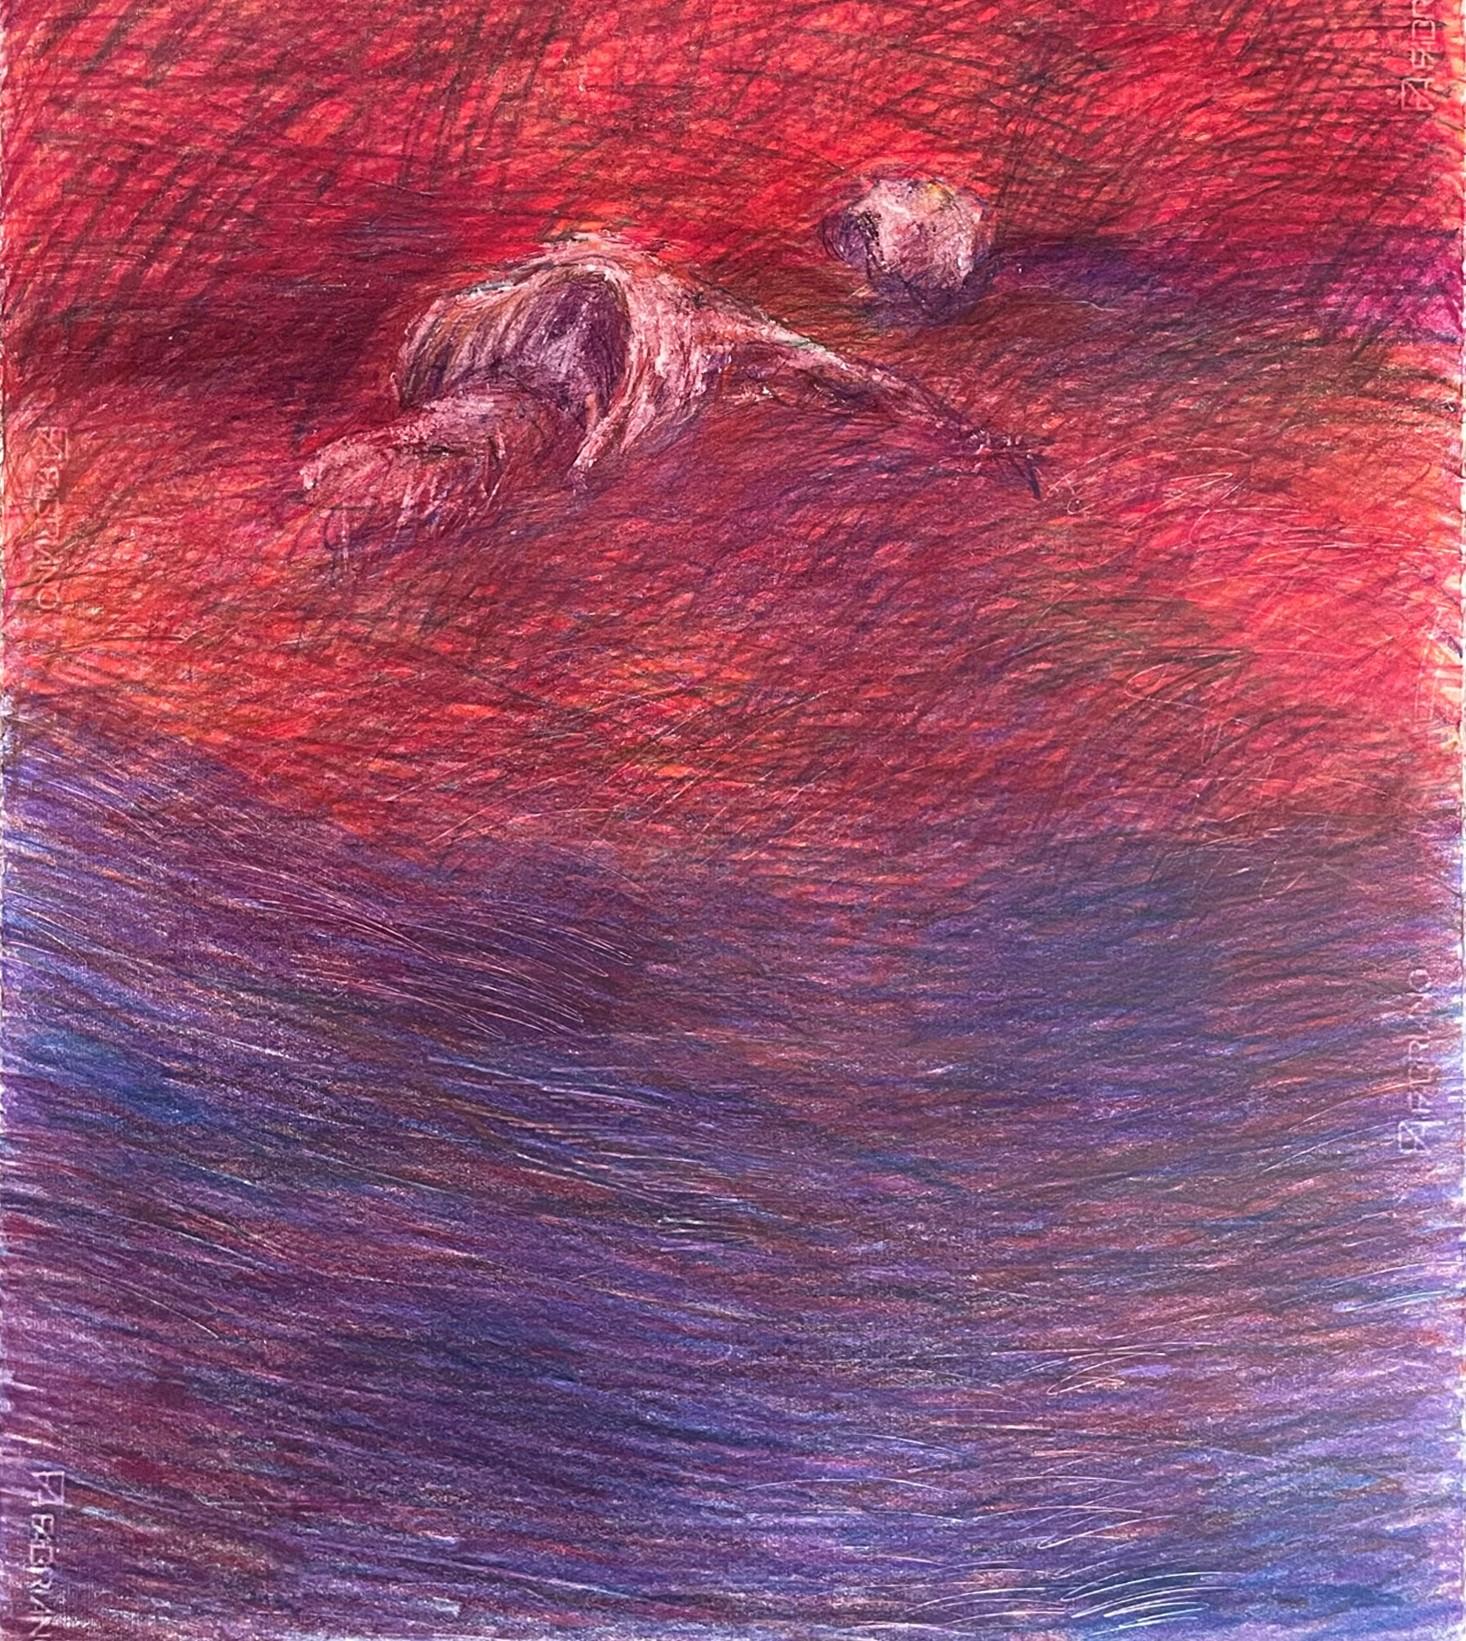 Untitled_Dead Body on the Field #1 - Red, Contemporary, 21st Century, Drawing - Pink Landscape Art by Zsolt Berszán